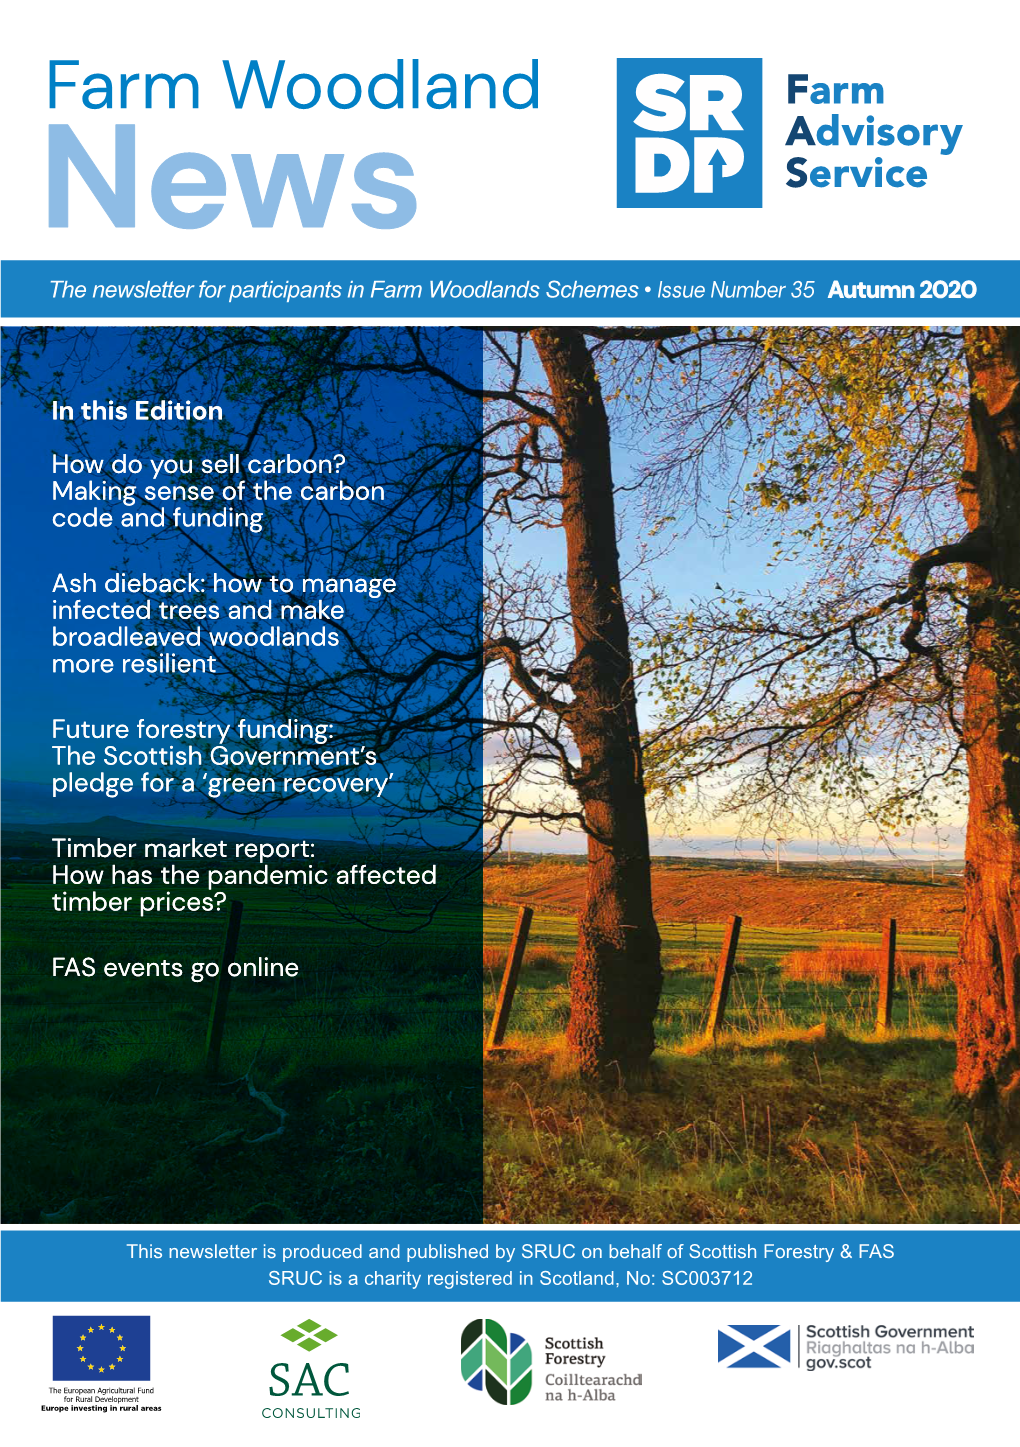 Farm Woodland News the Newsletter for Participants in Farm Woodlands Schemes • Issue Number 35 Autumn 2020